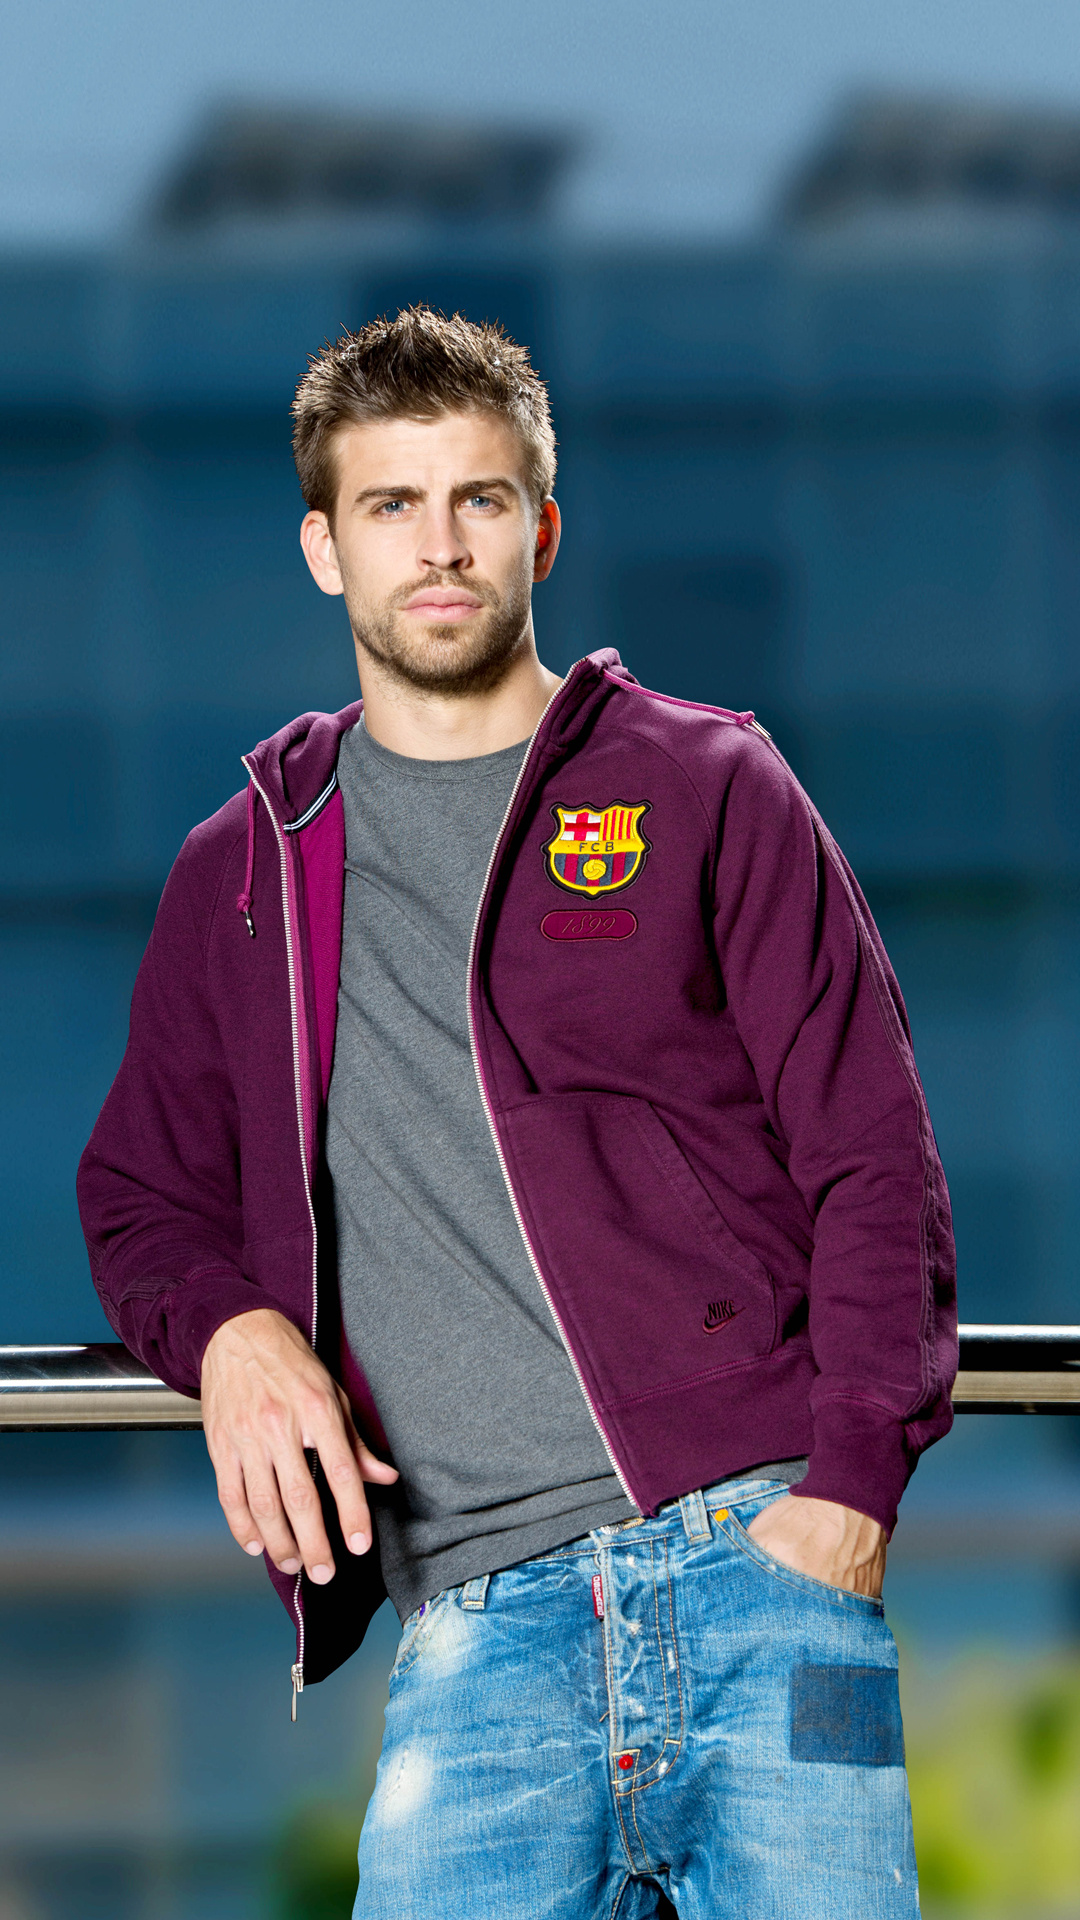 Gerard Pique: A key player for Spain, winning the 2010 World Cup and the 2012 European Championships. 1080x1920 Full HD Wallpaper.